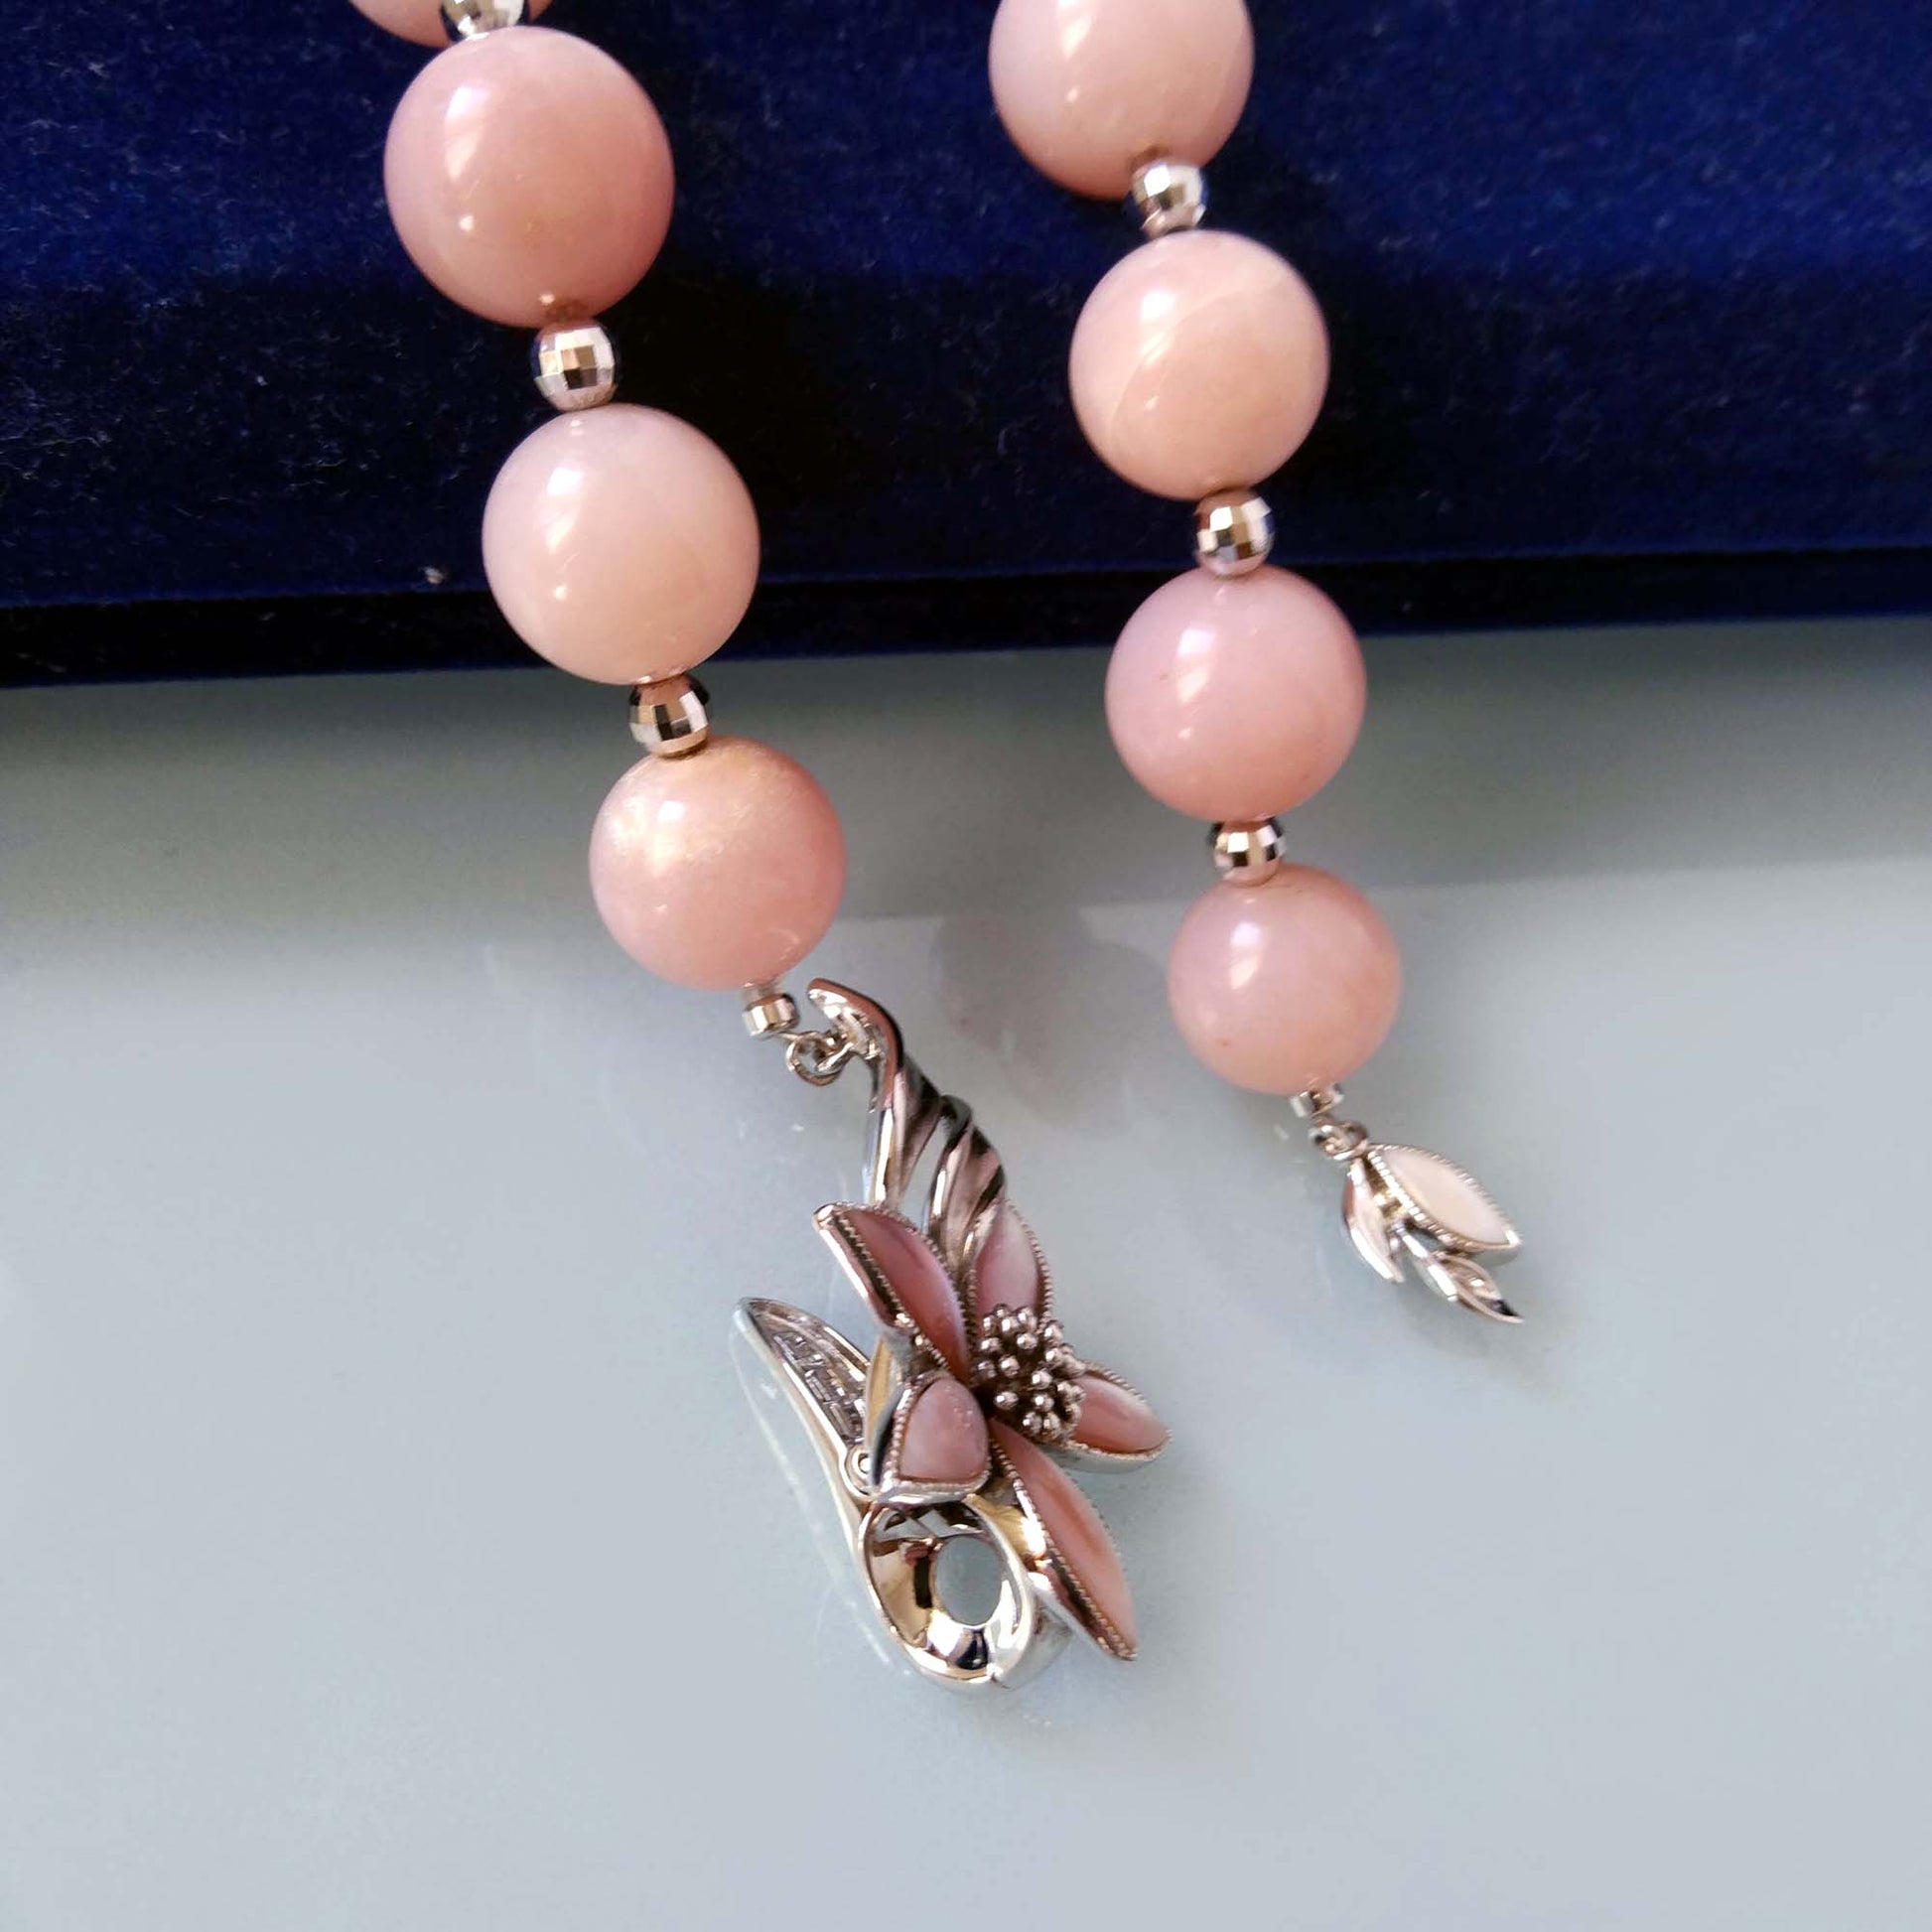 Pink Y necklace with flower pendant-clasp